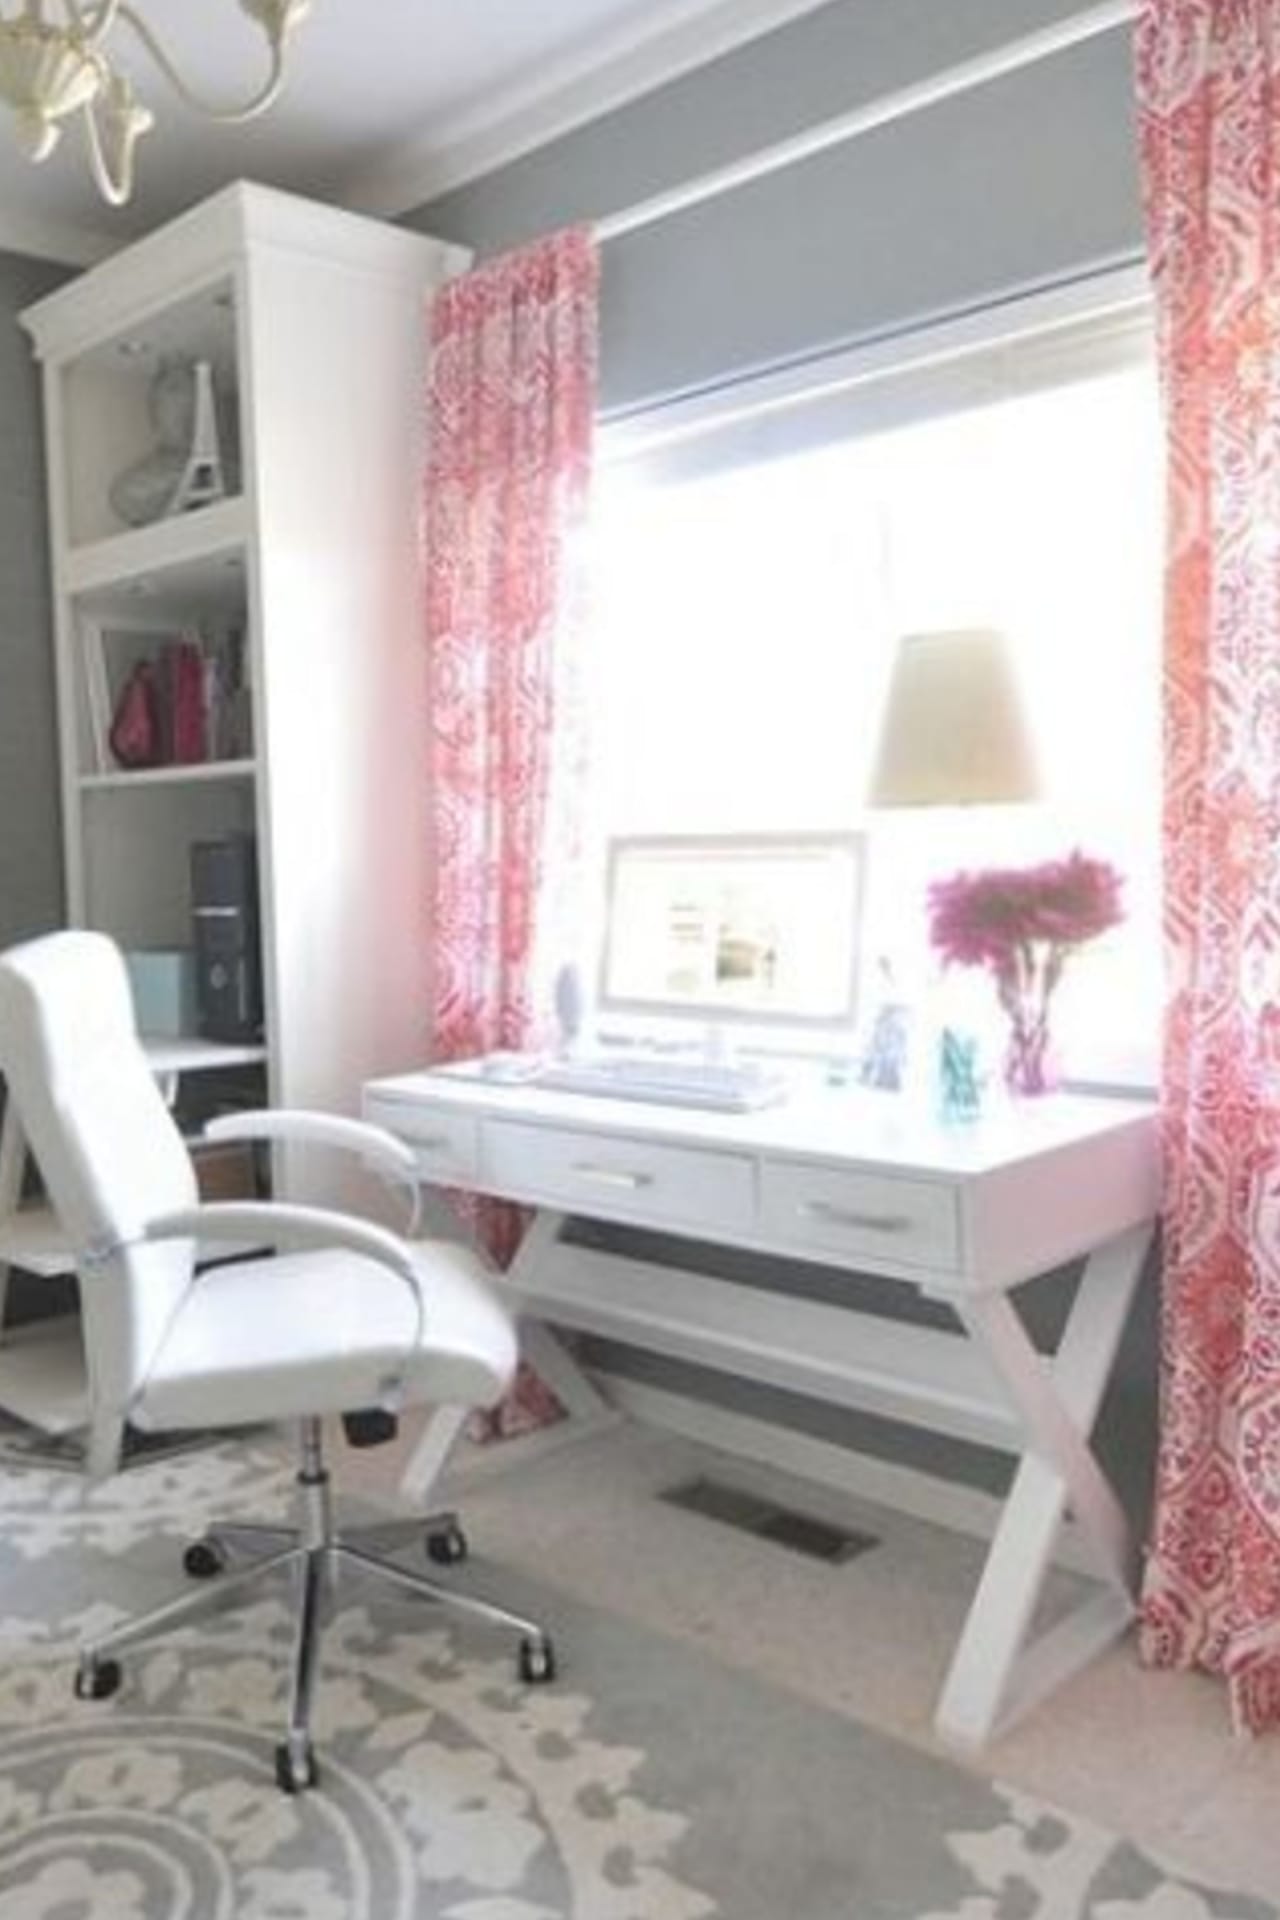 Pretty and classy home office ideas for women - love the pink accents and color combos in this work from office!